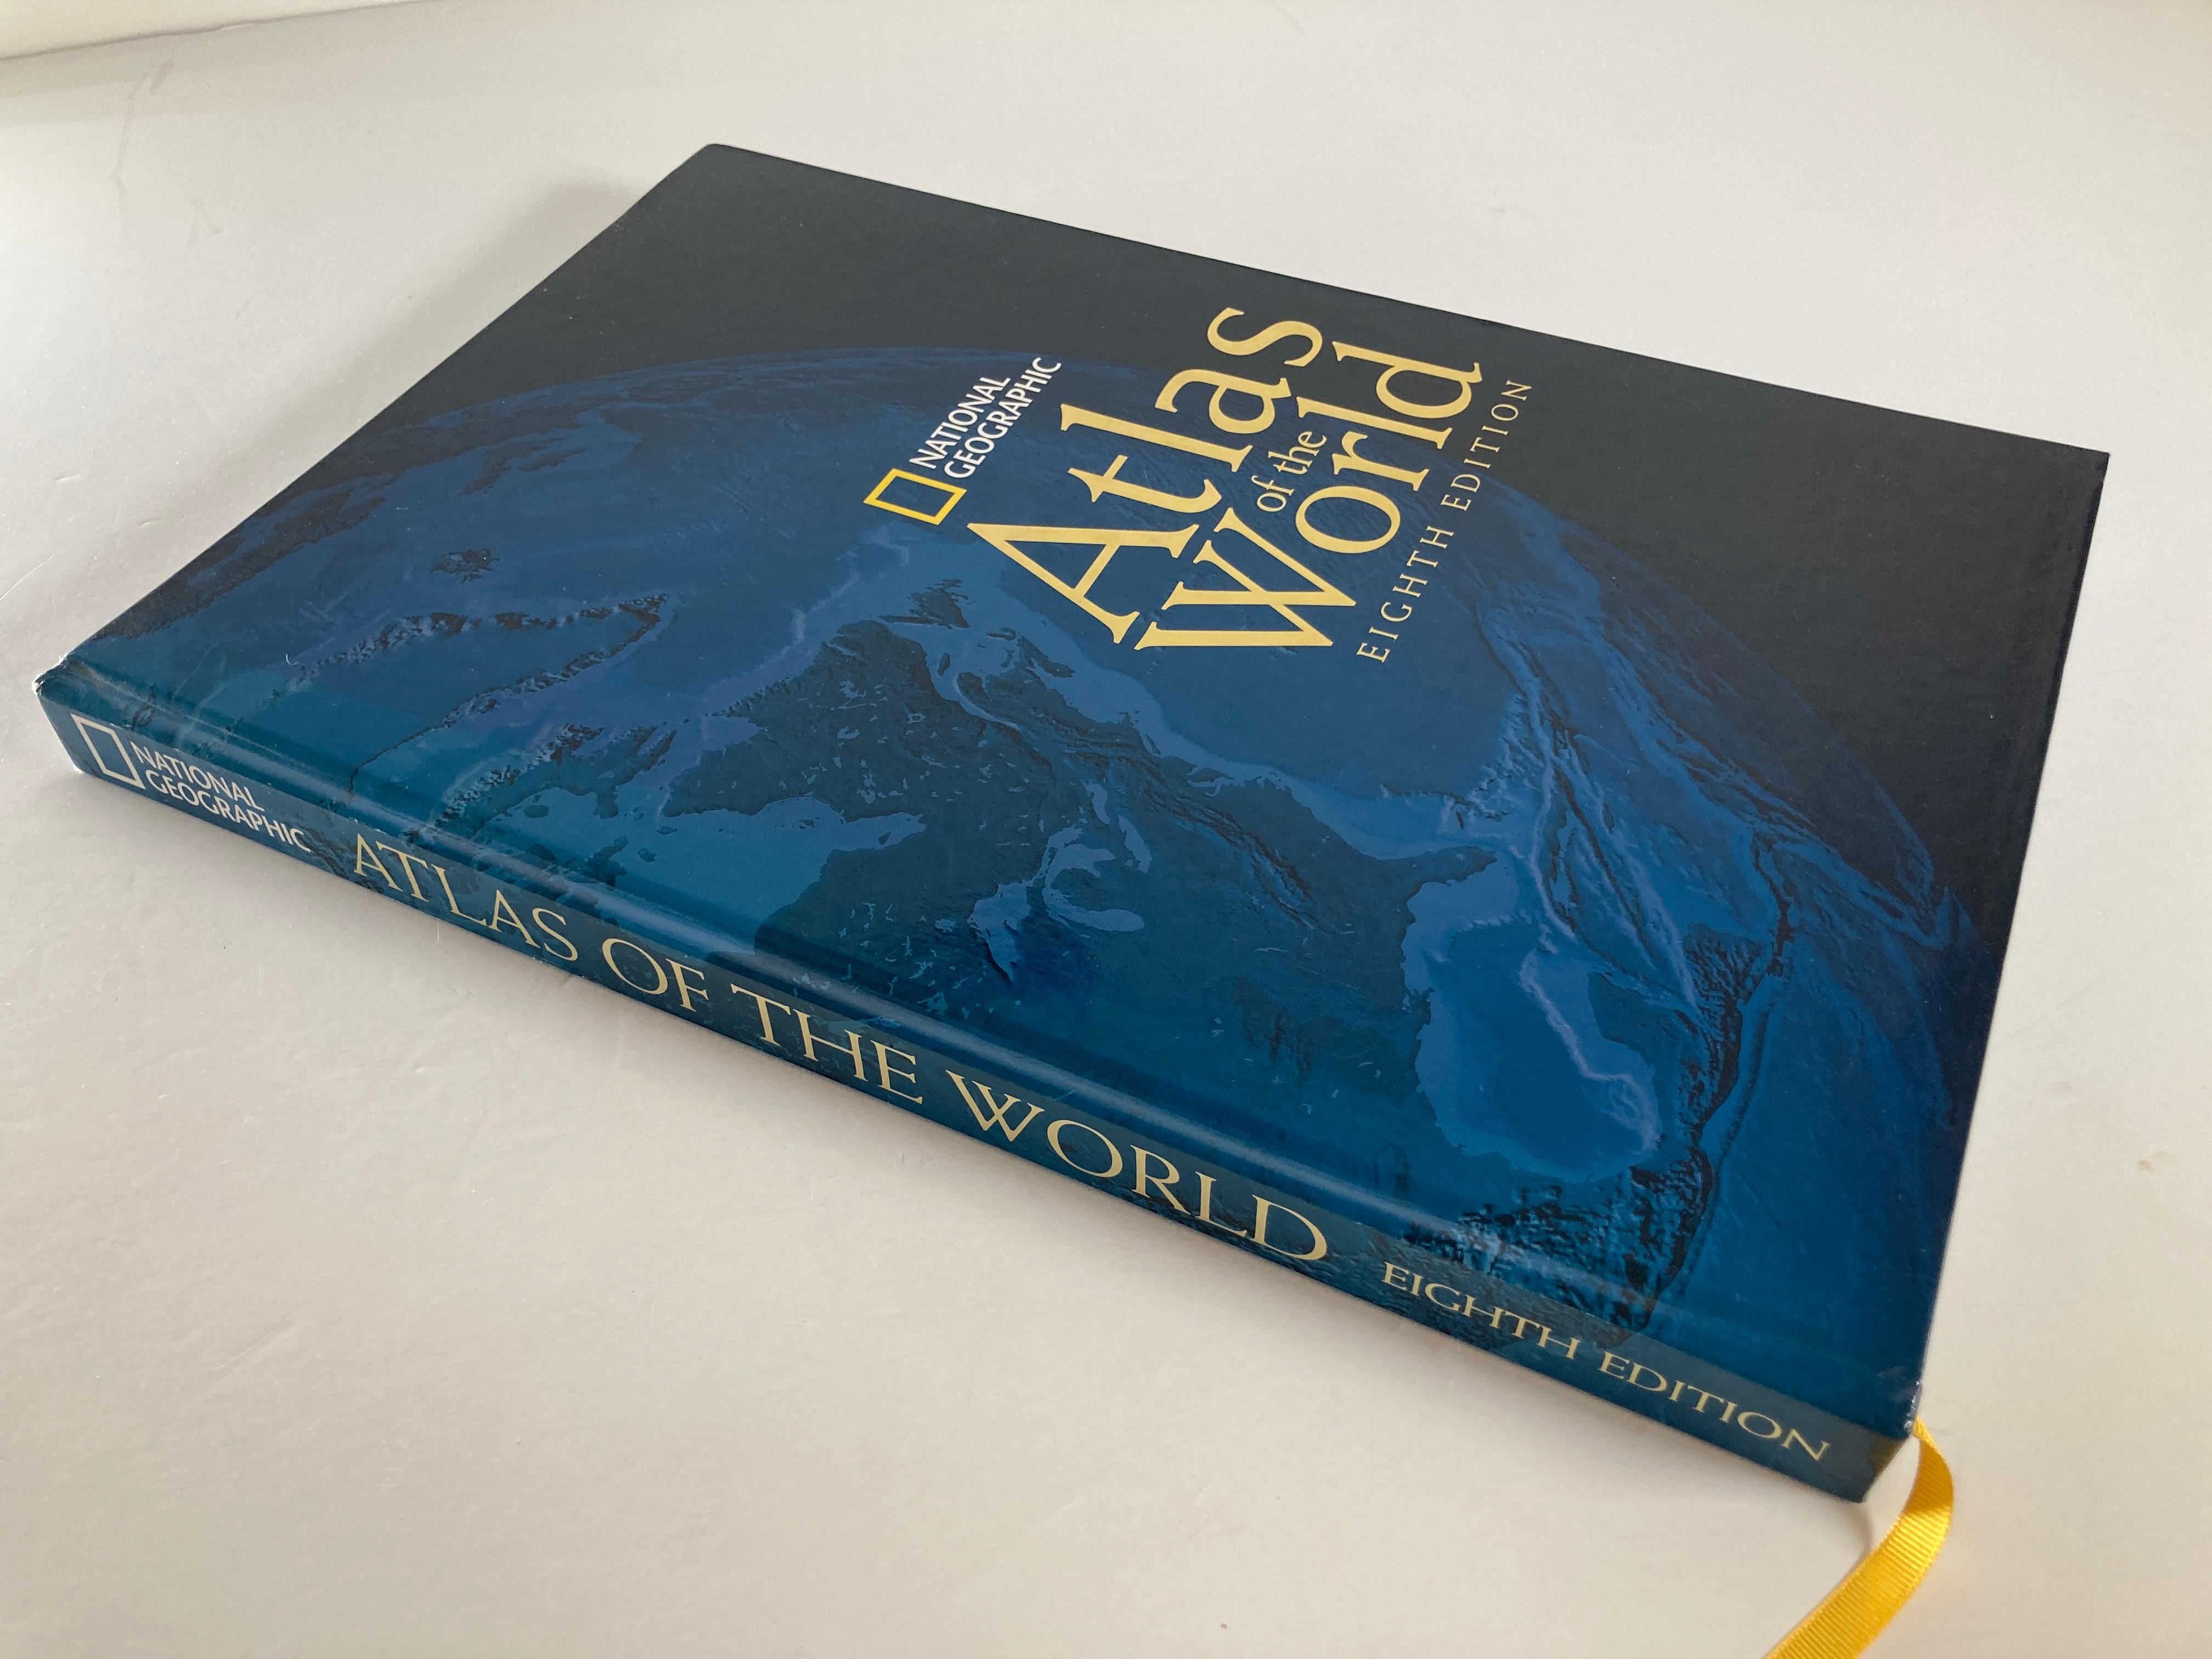 national geographic atlas of the world 8th edition